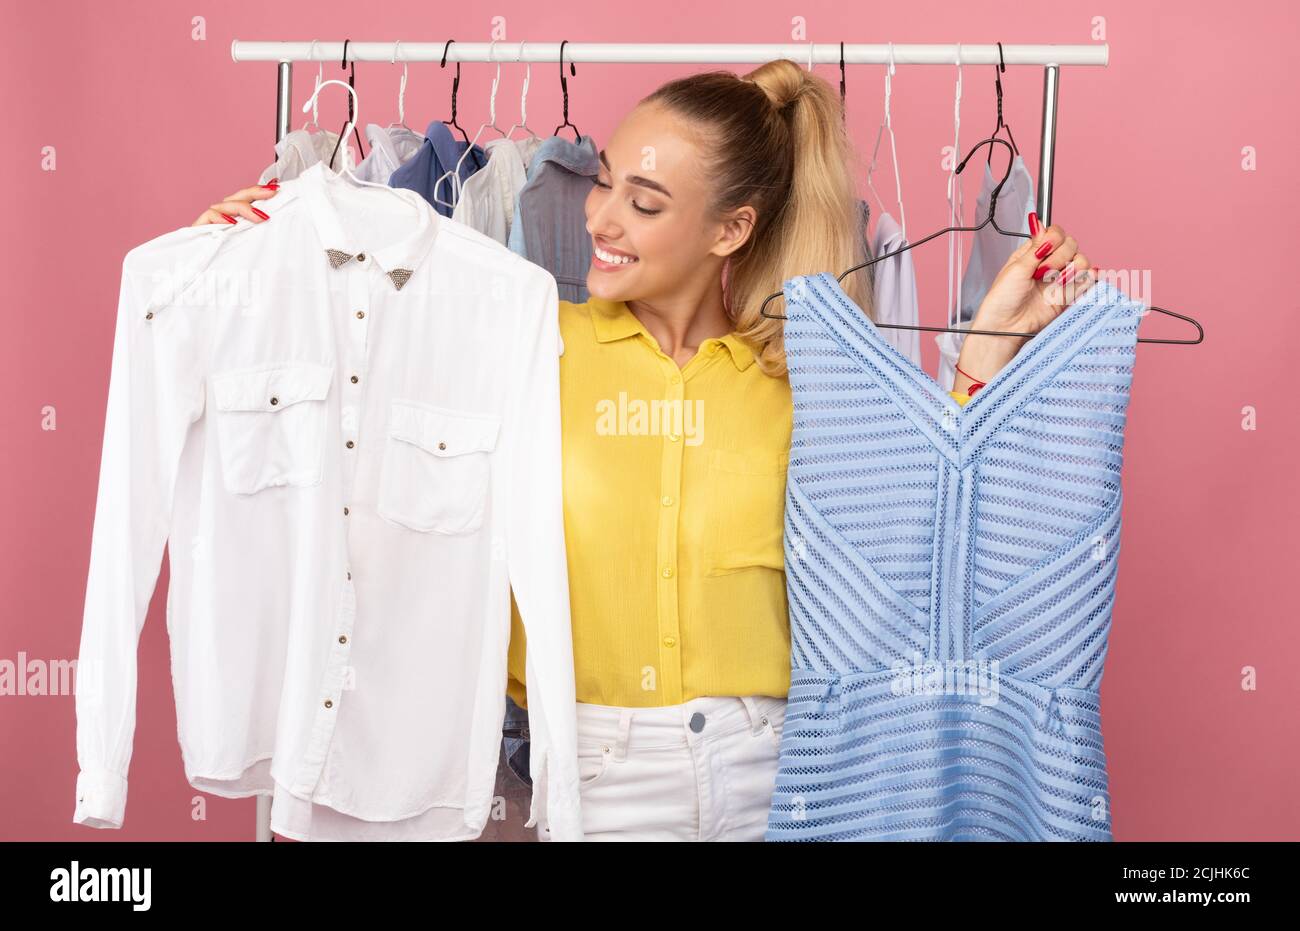 Young lady holding hangers with dress and shirt Stock Photo